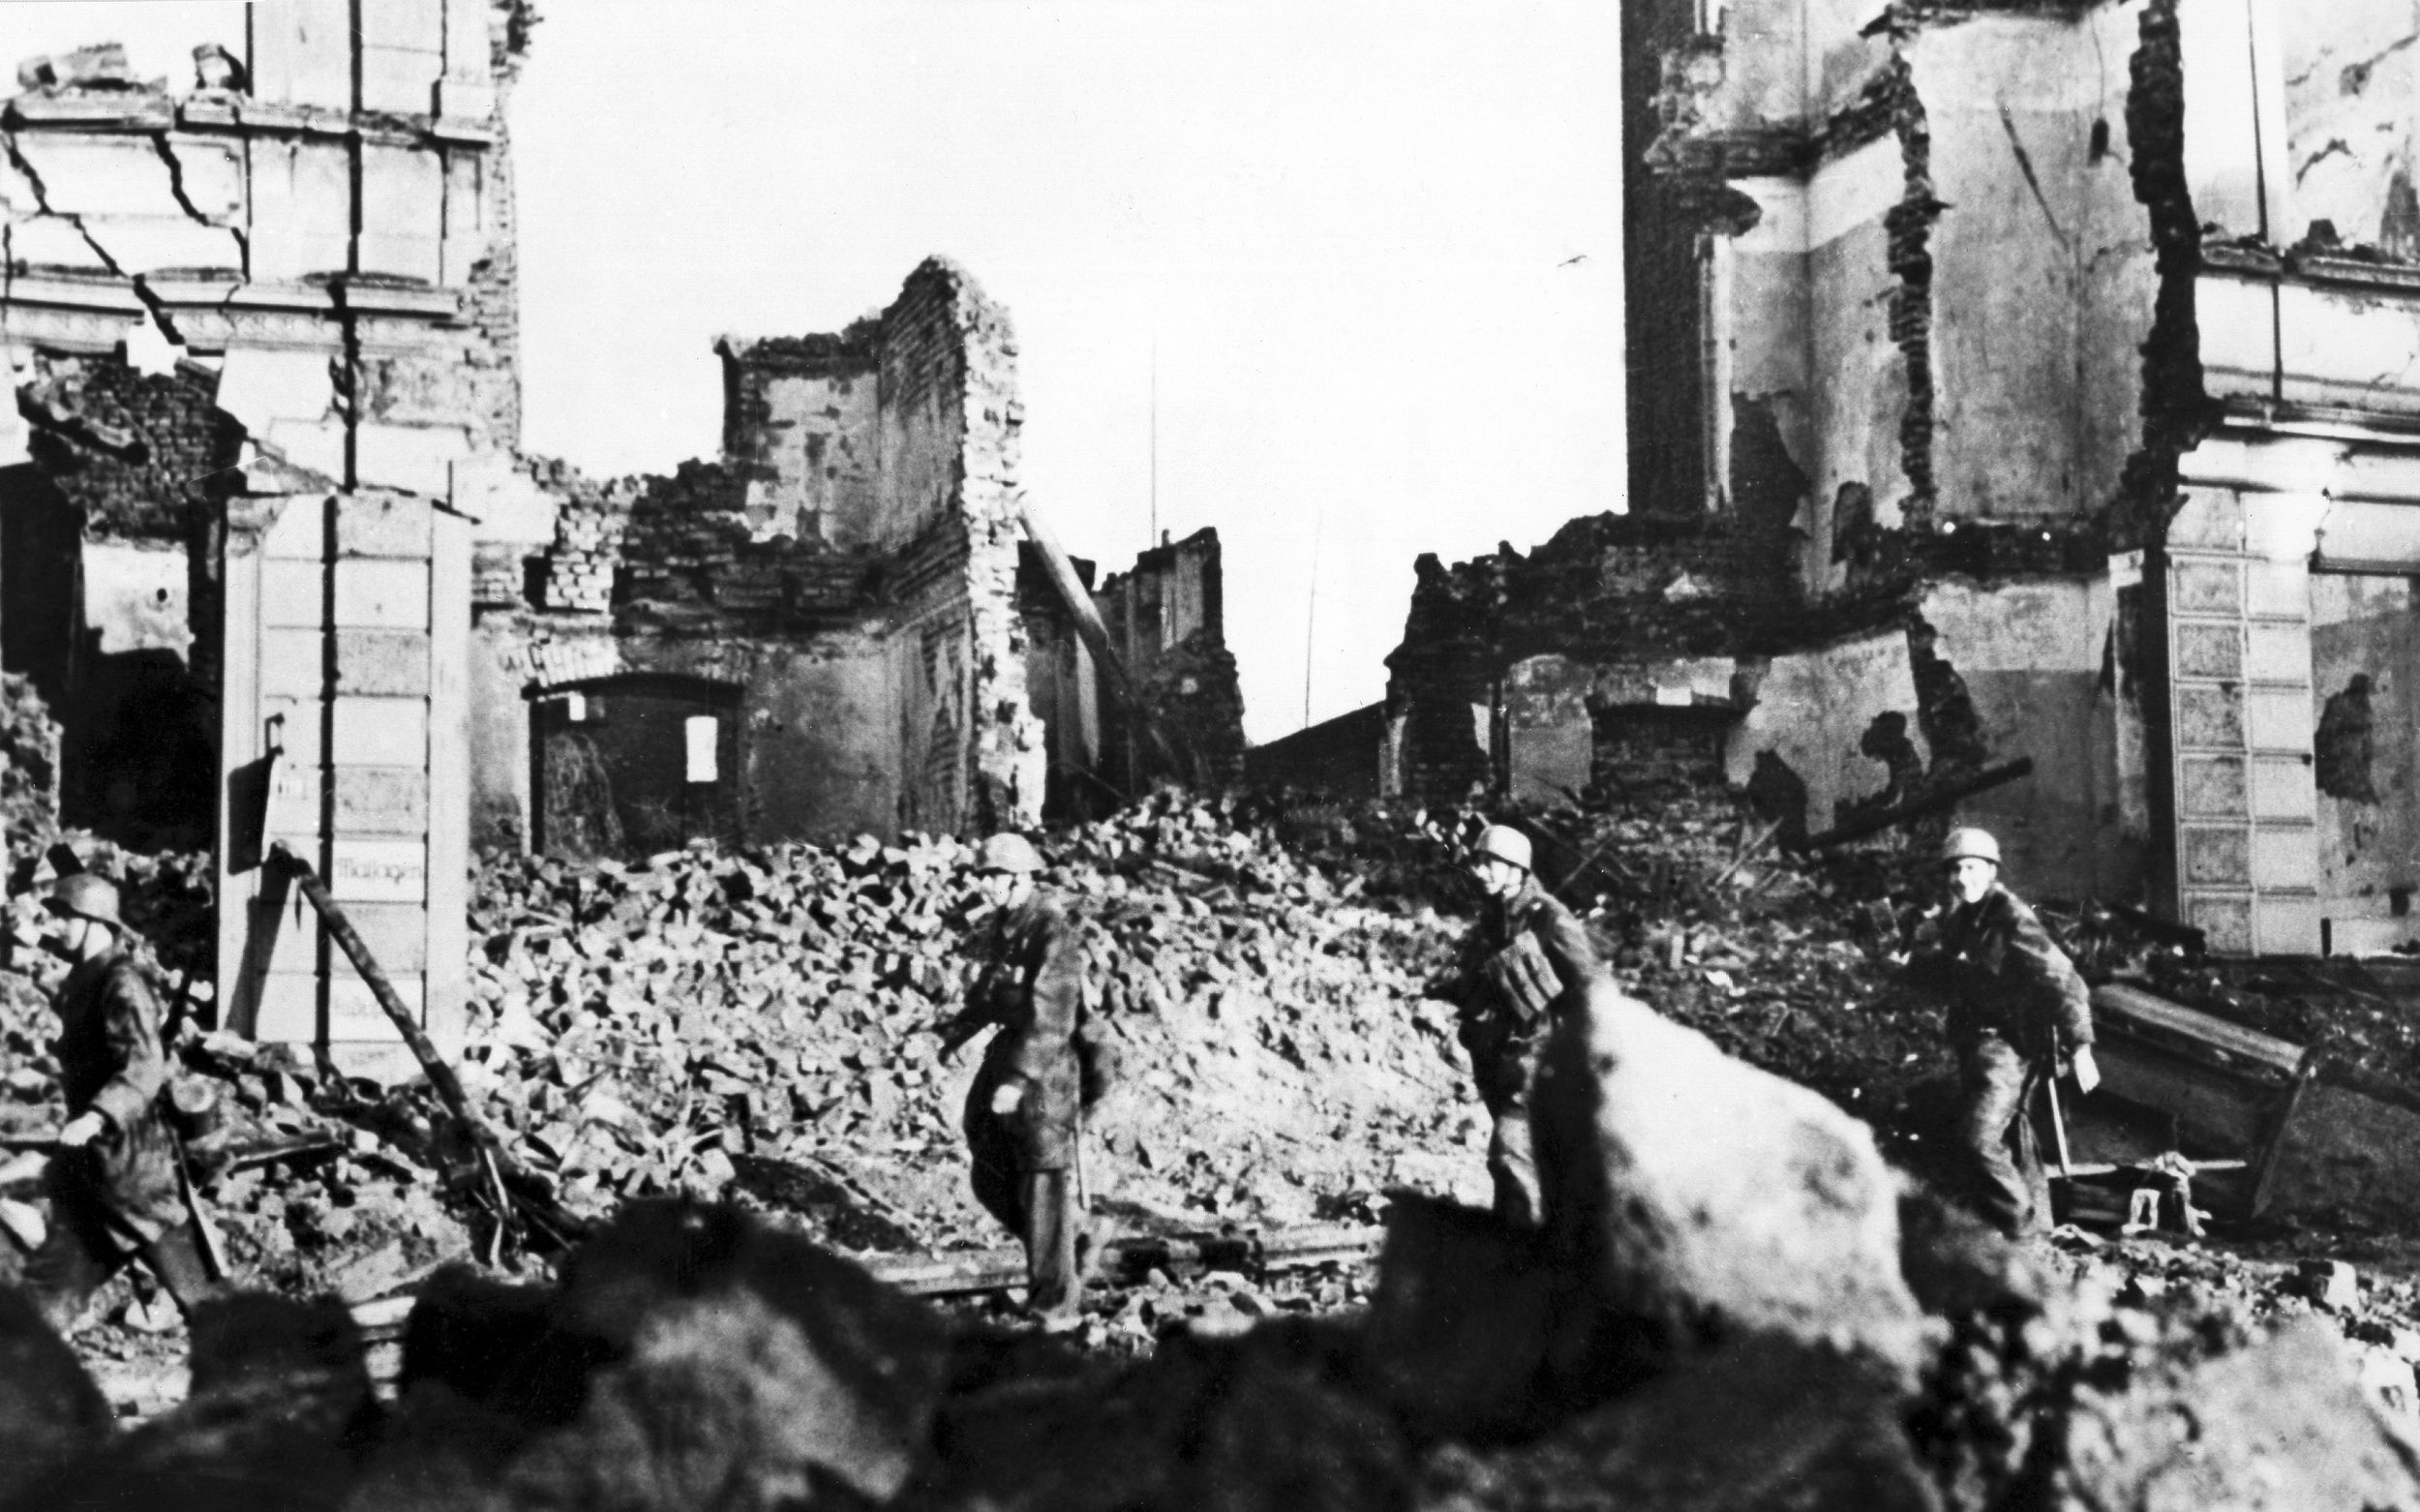 Elite German paratroopers, or fallschirmjager, were among the defenders of Aachen. Here, three of these soldiers are seen scrambling through the rubble of a destroyed building in the city as they move to new defensive positions. (ullstein bild)